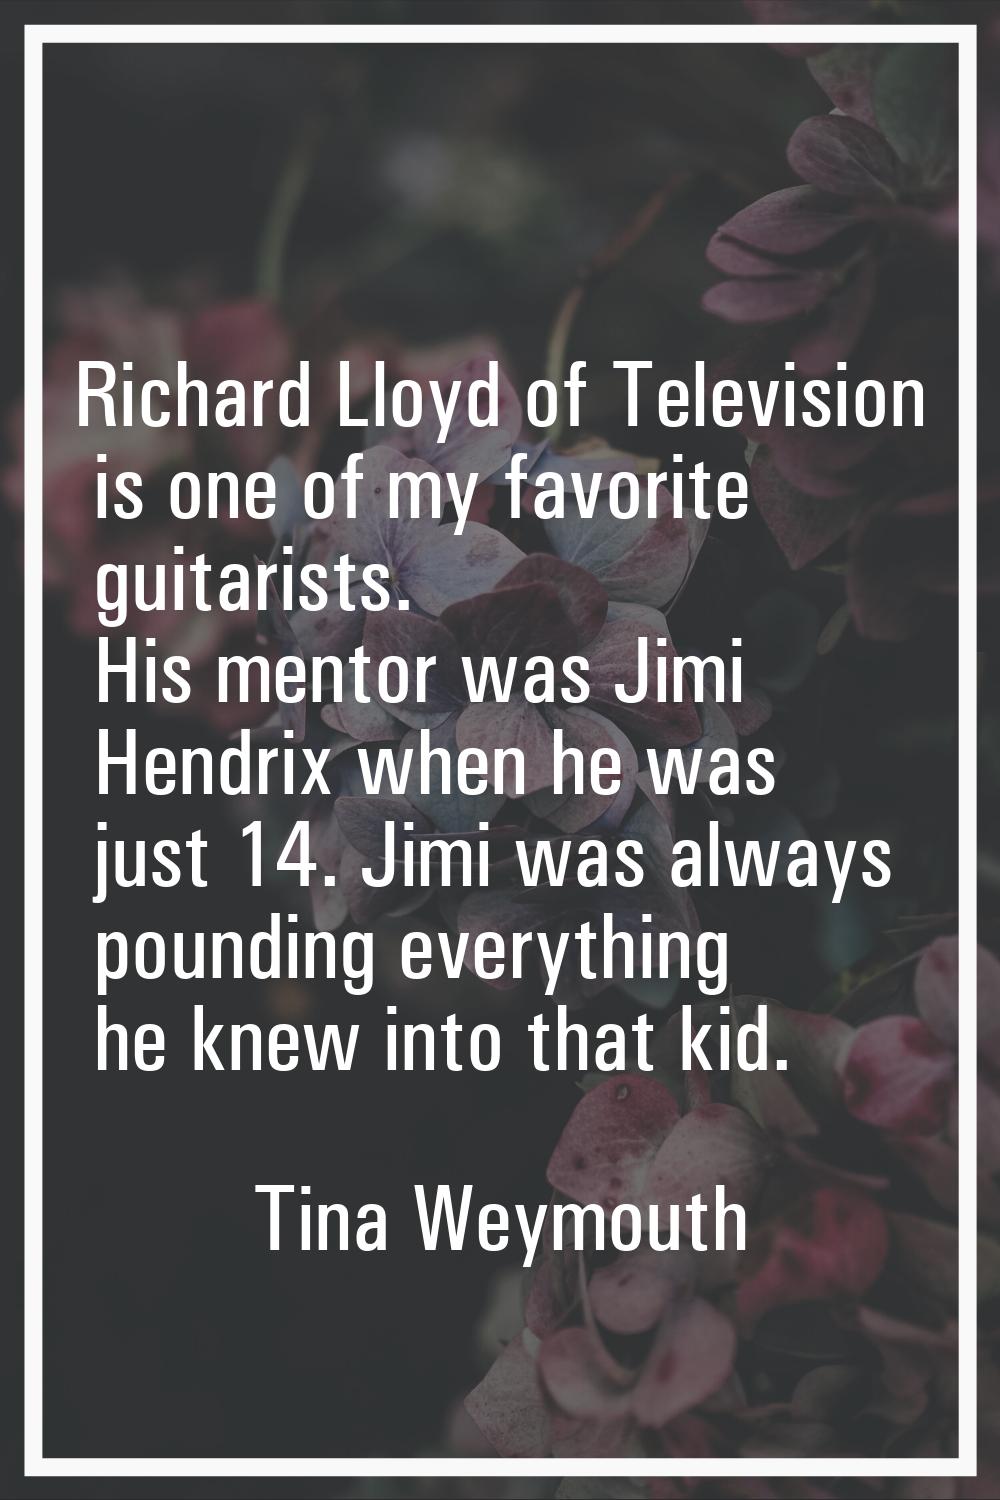 Richard Lloyd of Television is one of my favorite guitarists. His mentor was Jimi Hendrix when he w